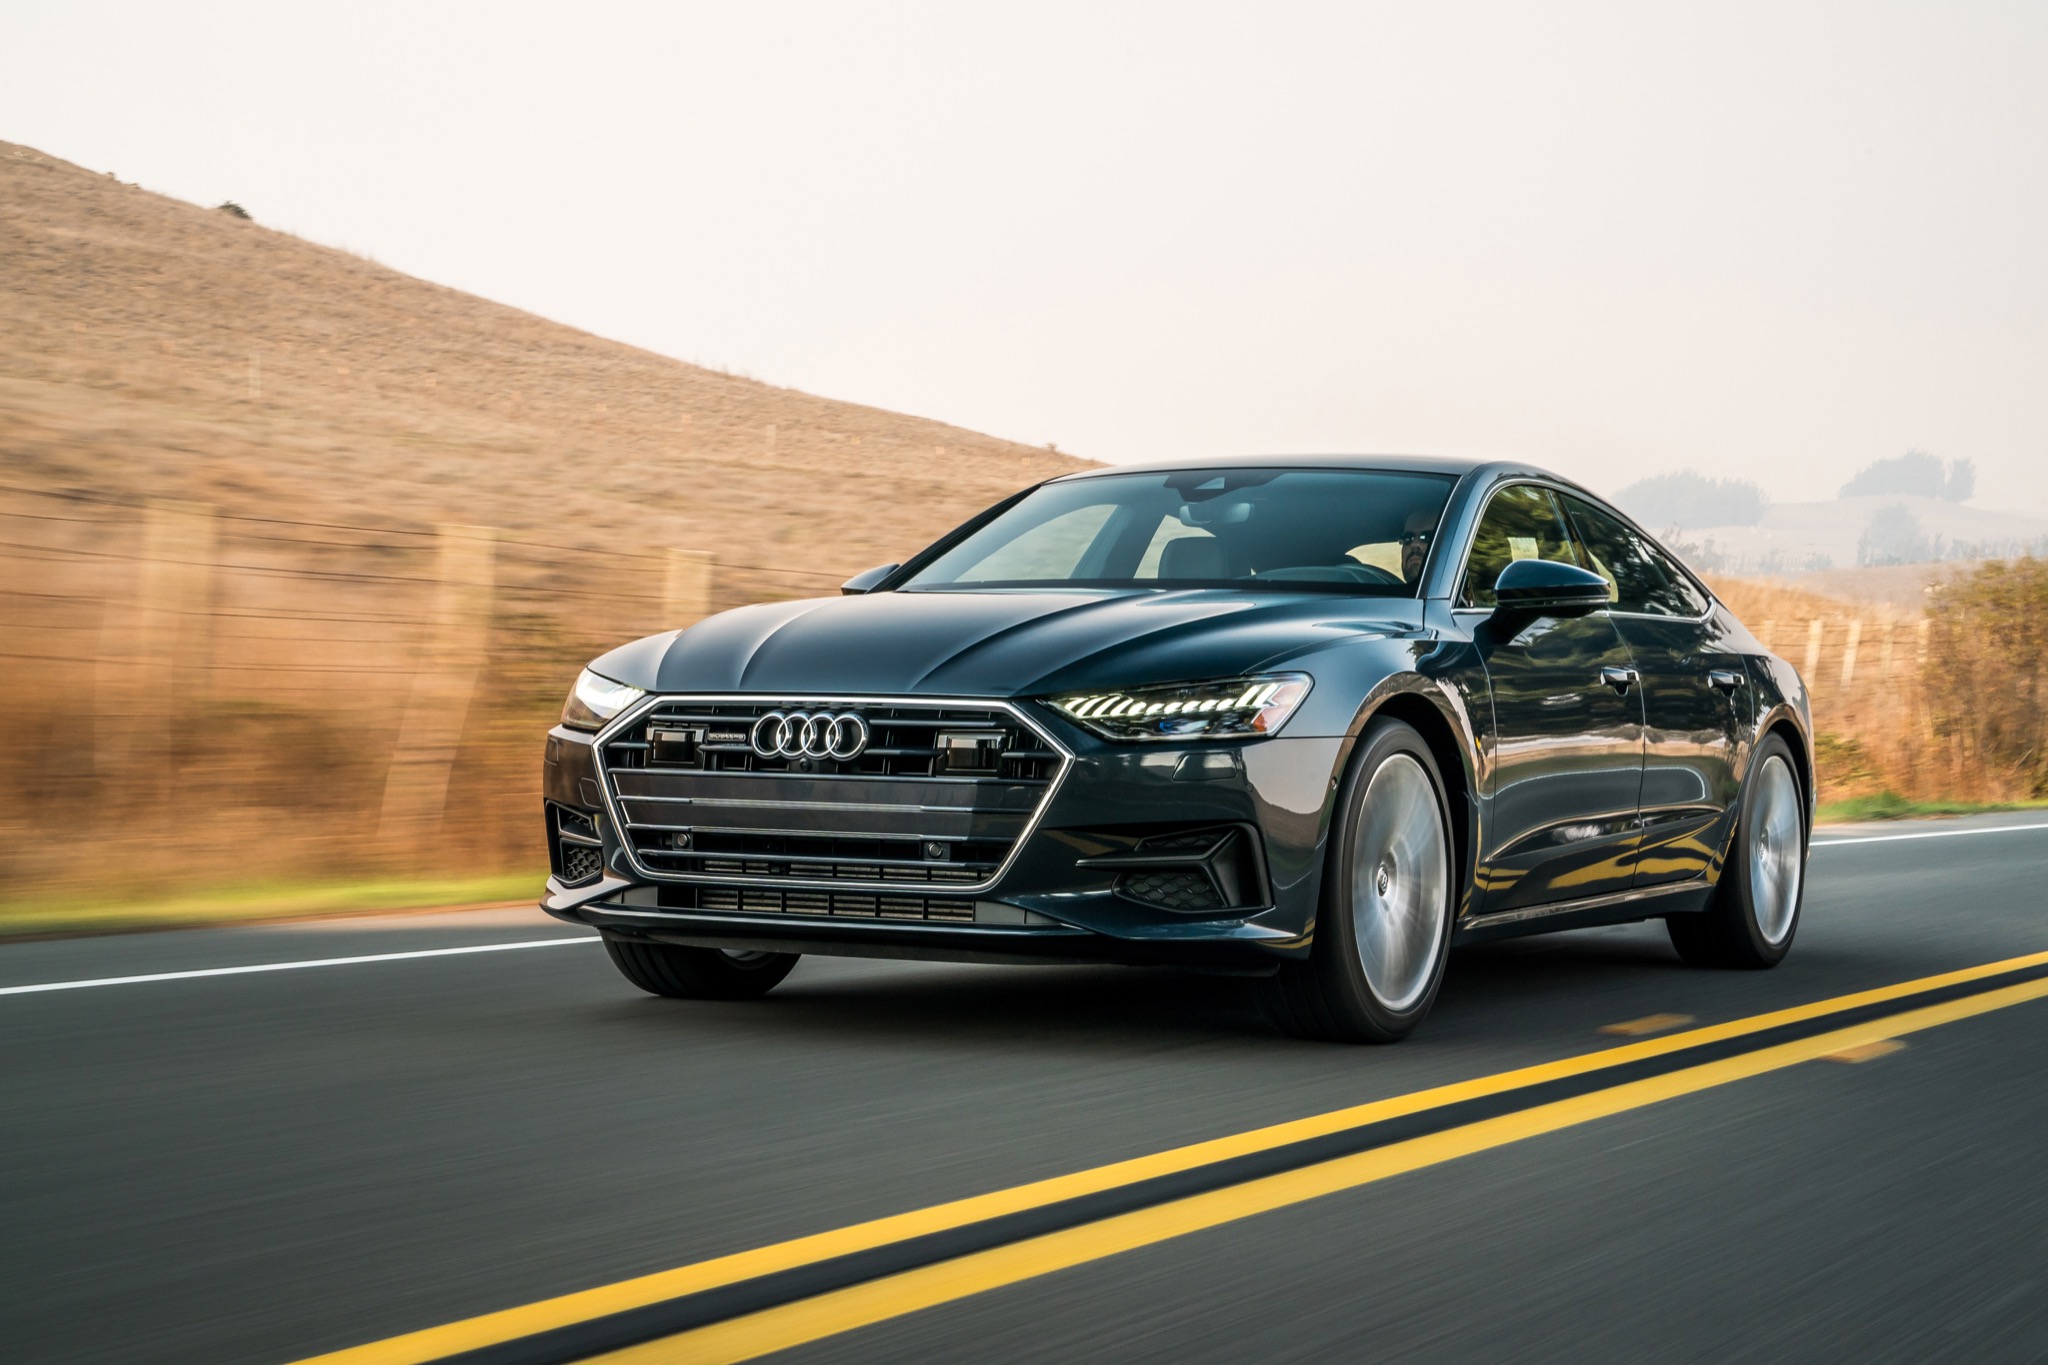 The 2019 Audi A7 might be all the car anyone ever needs